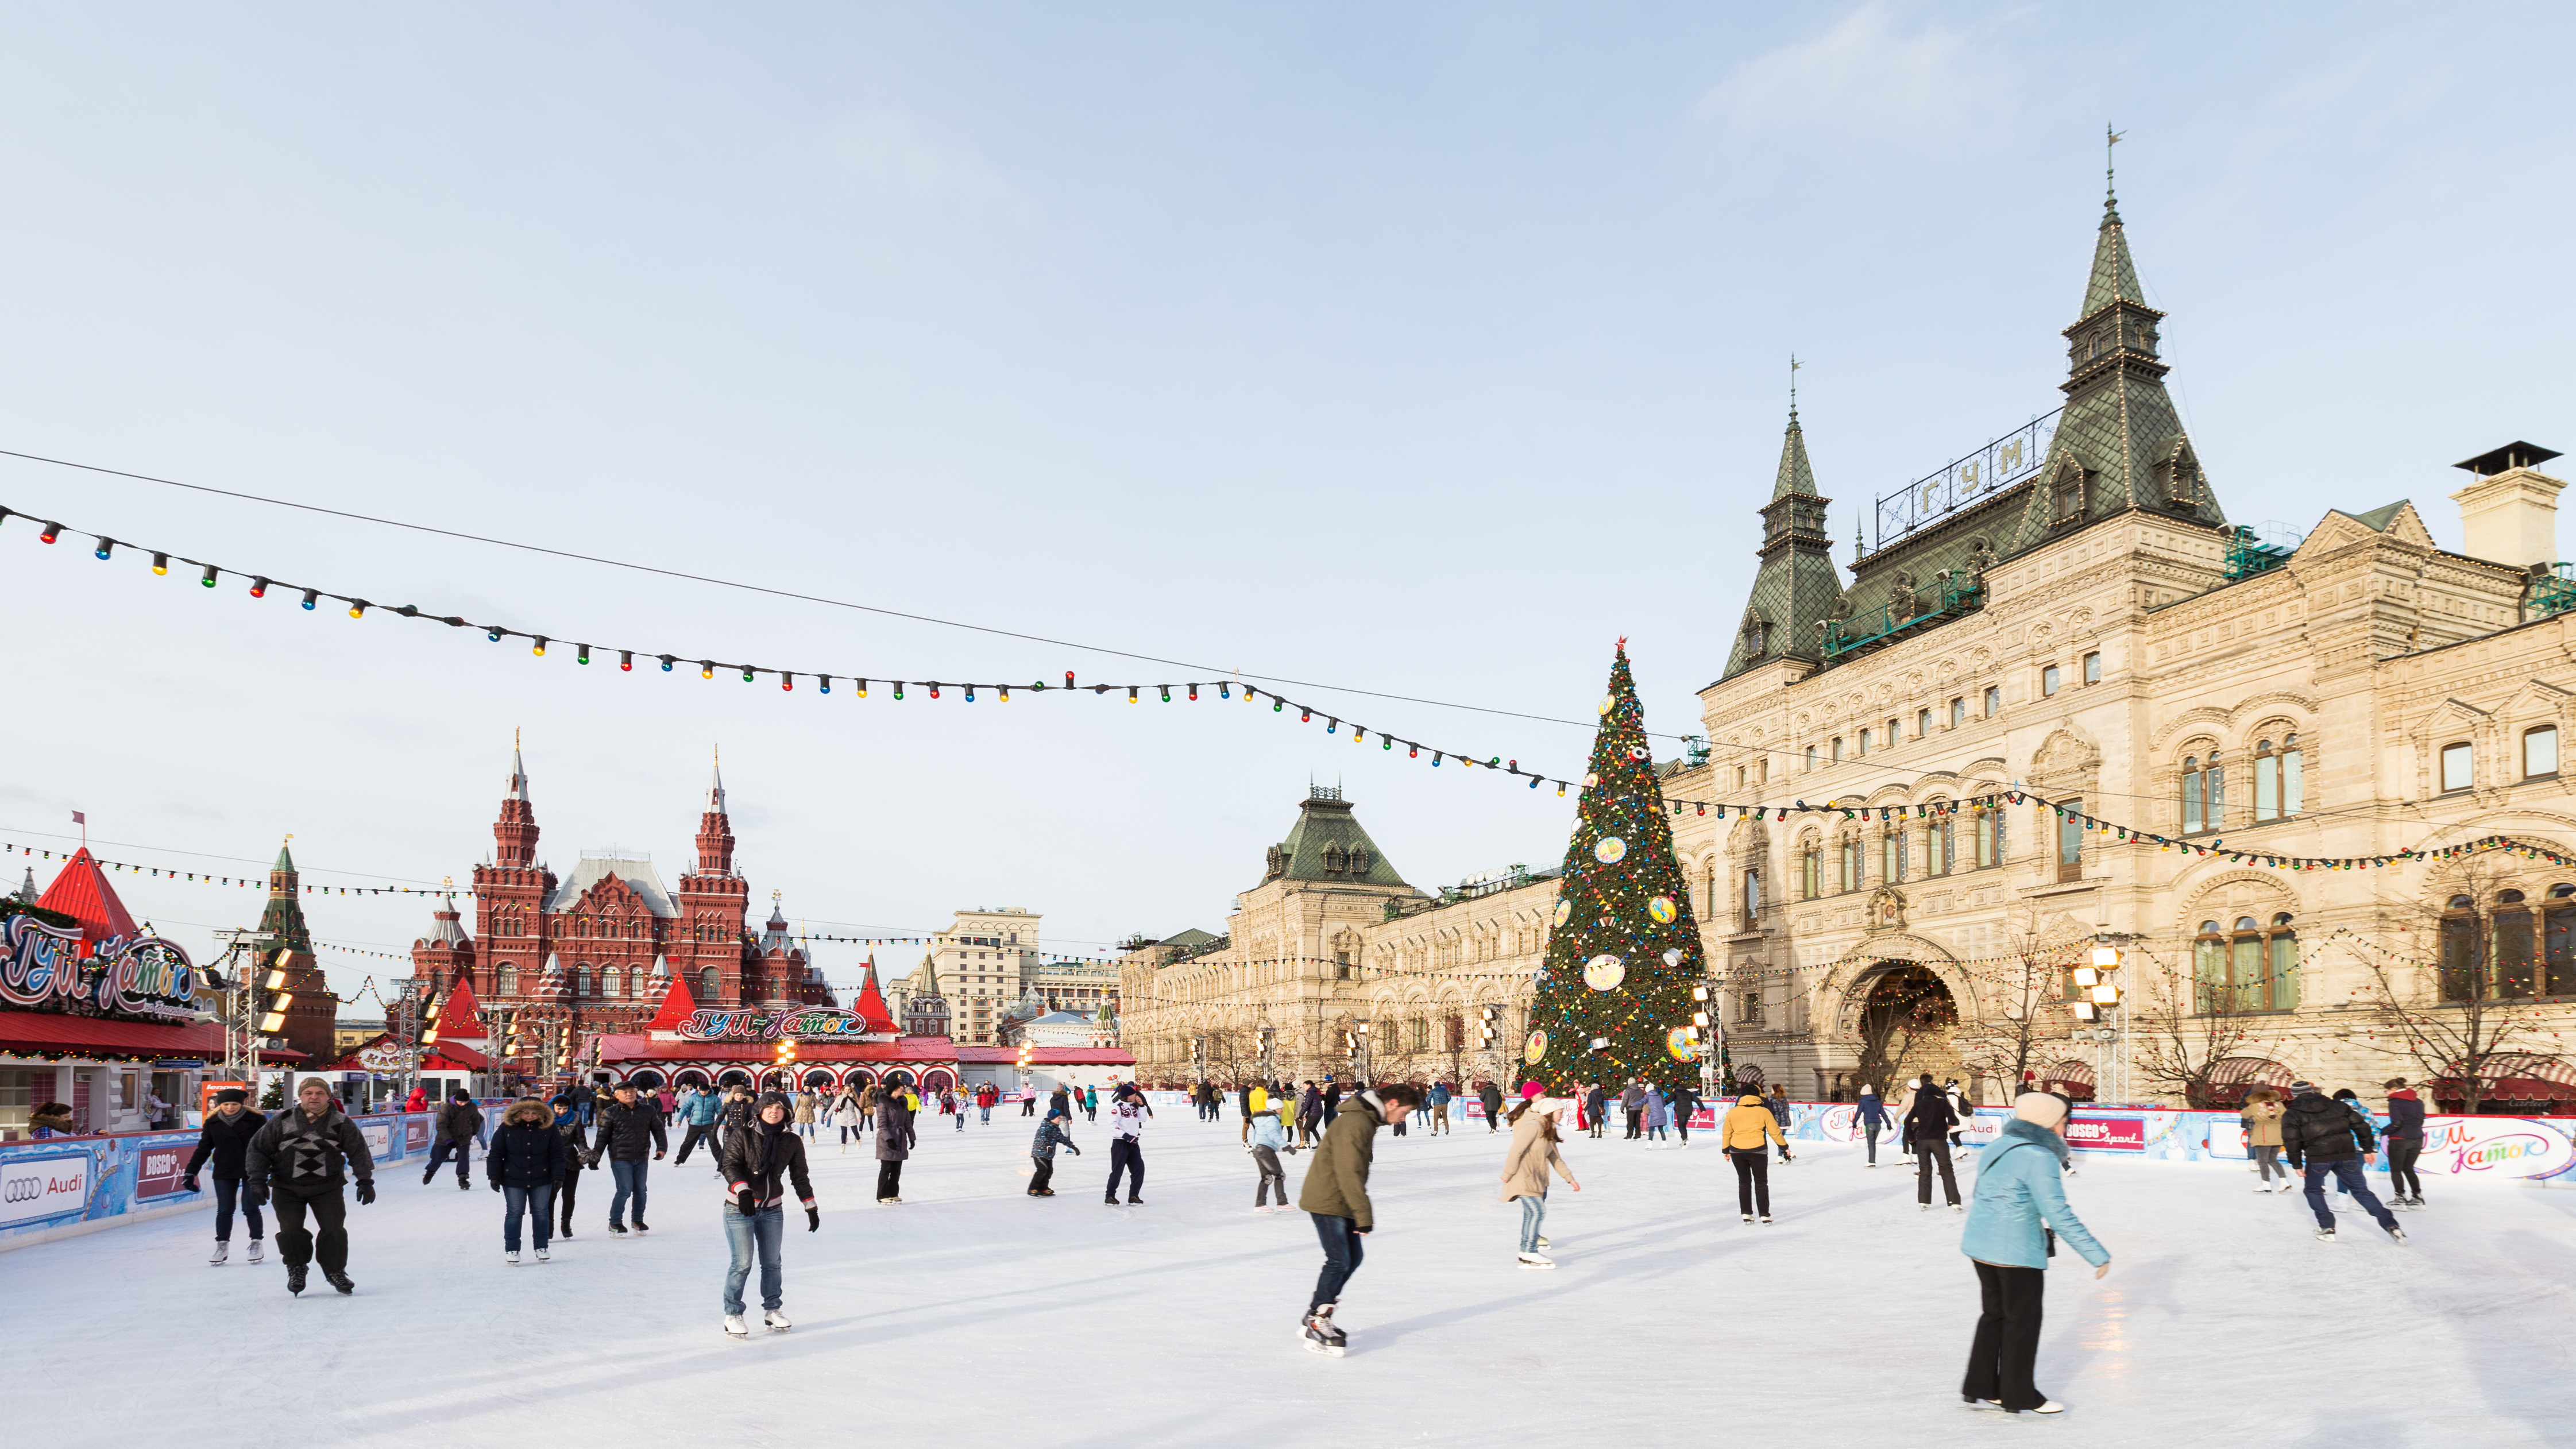 Every winter Red Square hosts ice skating rink.